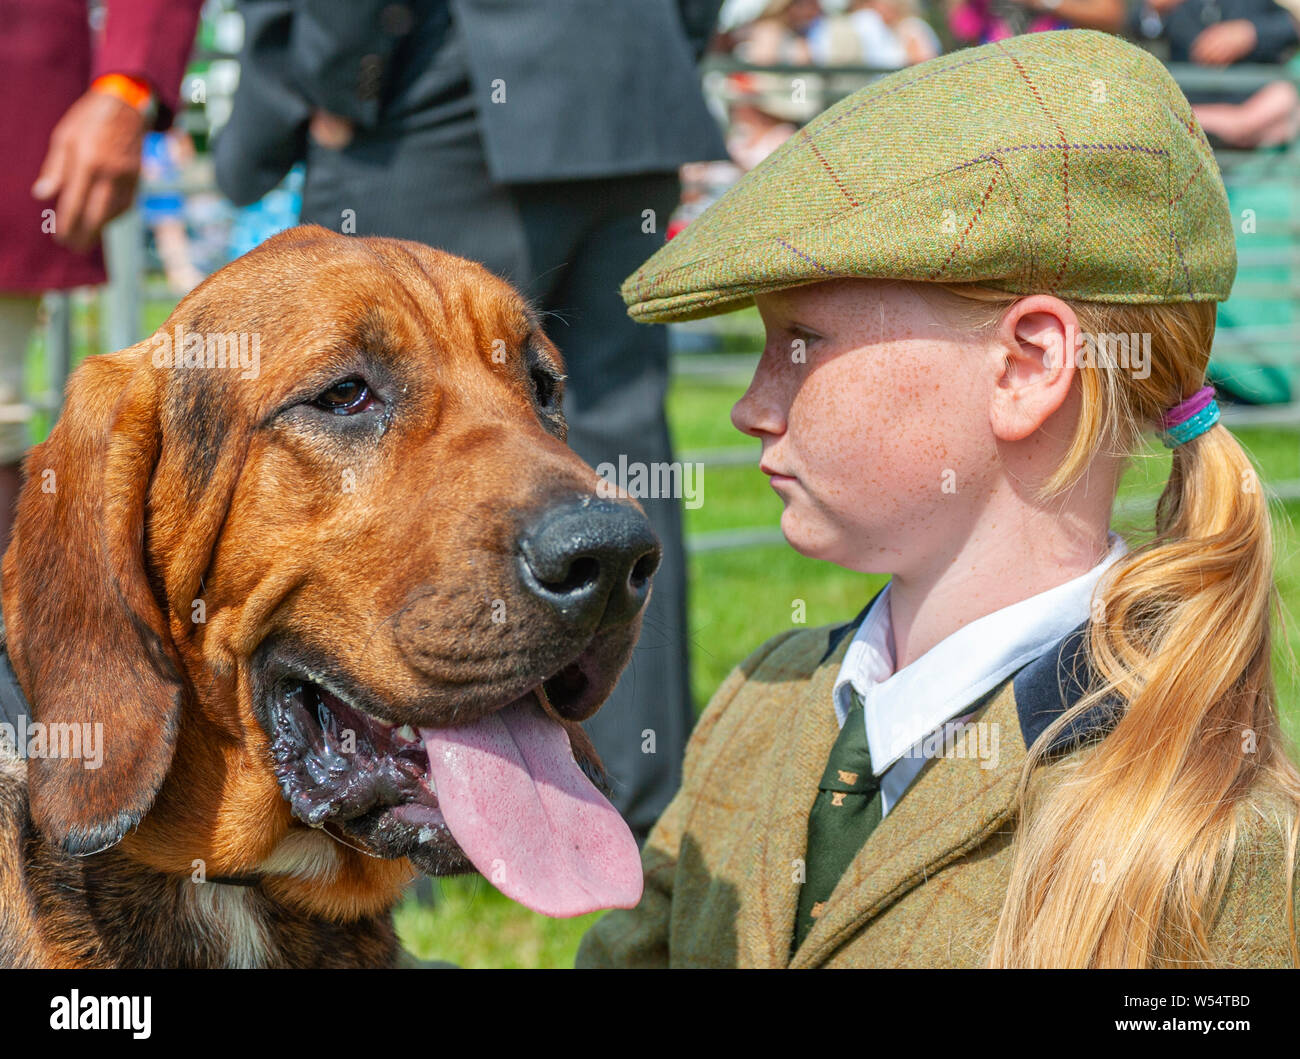 Festival of Hunting, Peterborough.  A Bloodhound waiting to go into the show ring with a young handler Stock Photo